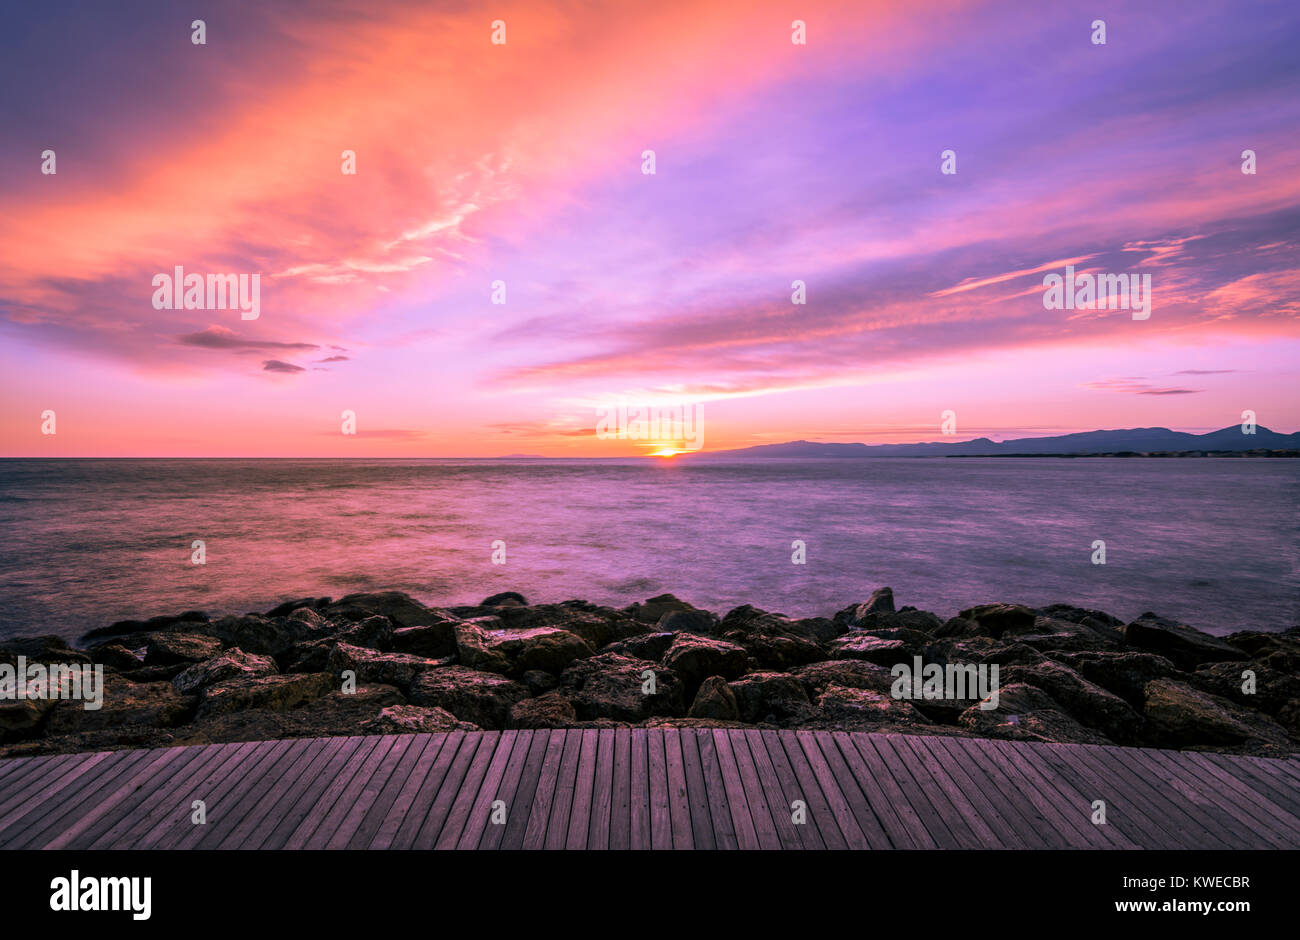 Colorful ultra violet dark sunset over the sea and with a wooden walkway and rocks on the foreground. Stock Photo